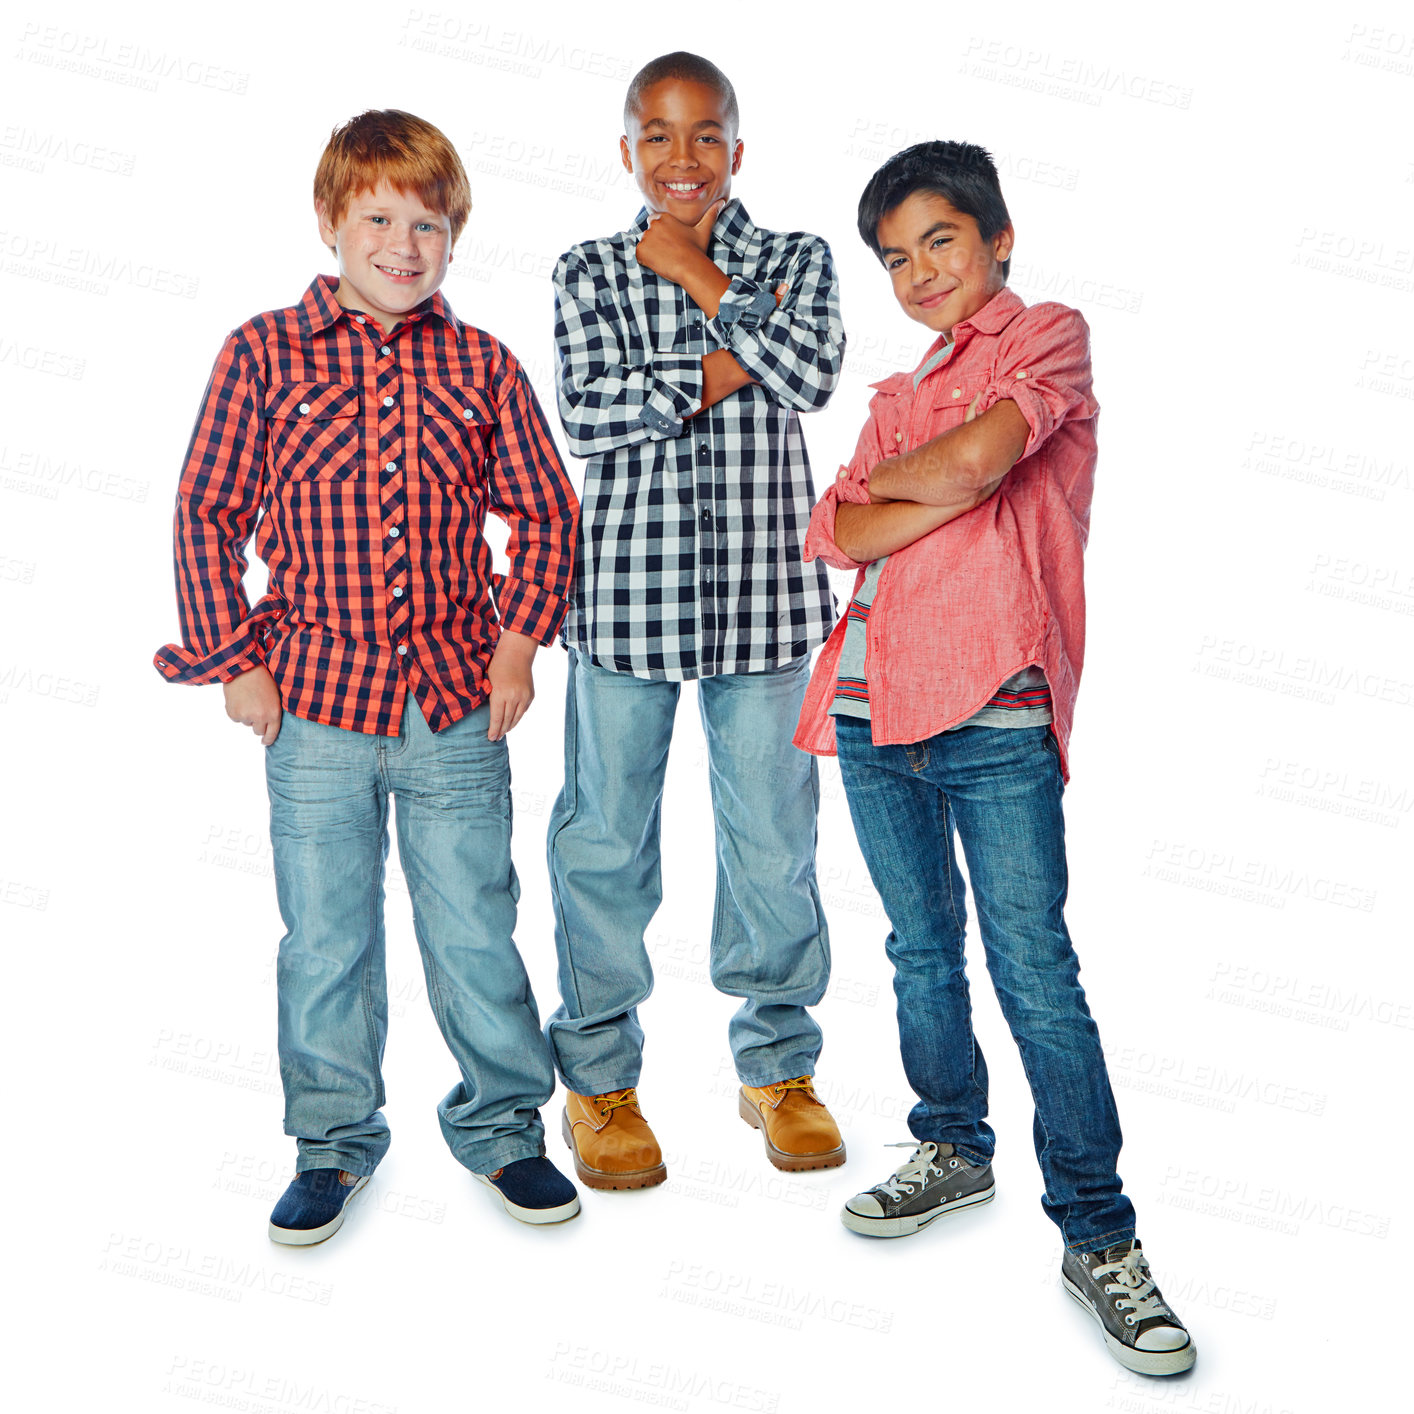 Buy stock photo Studio portrait of a group of young friends posing against a white background